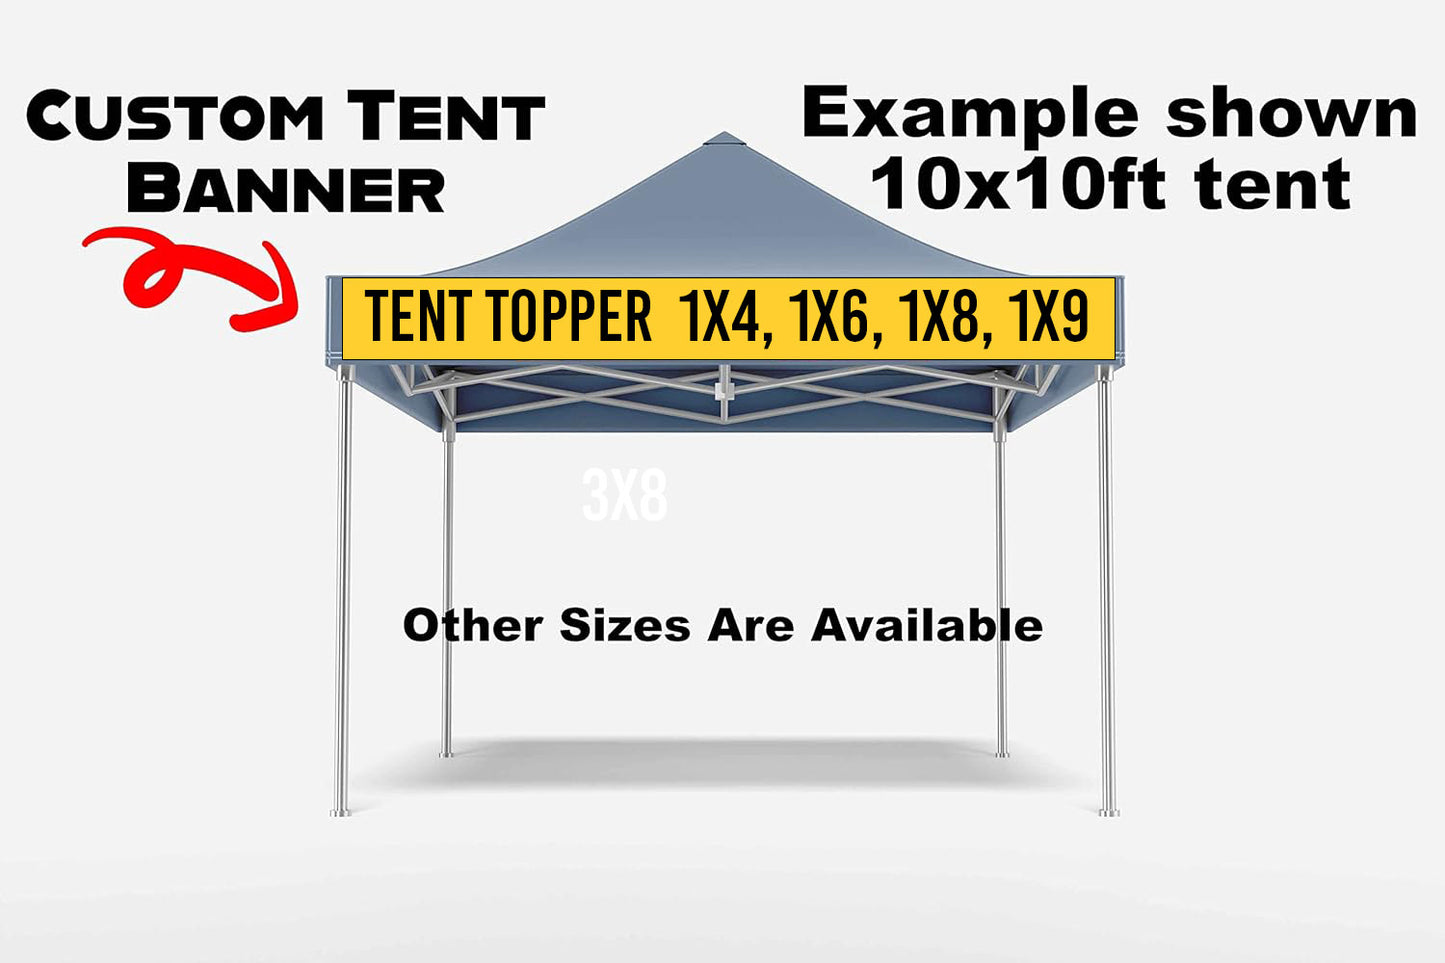 Tent / Canopy Banner / Tent Topper